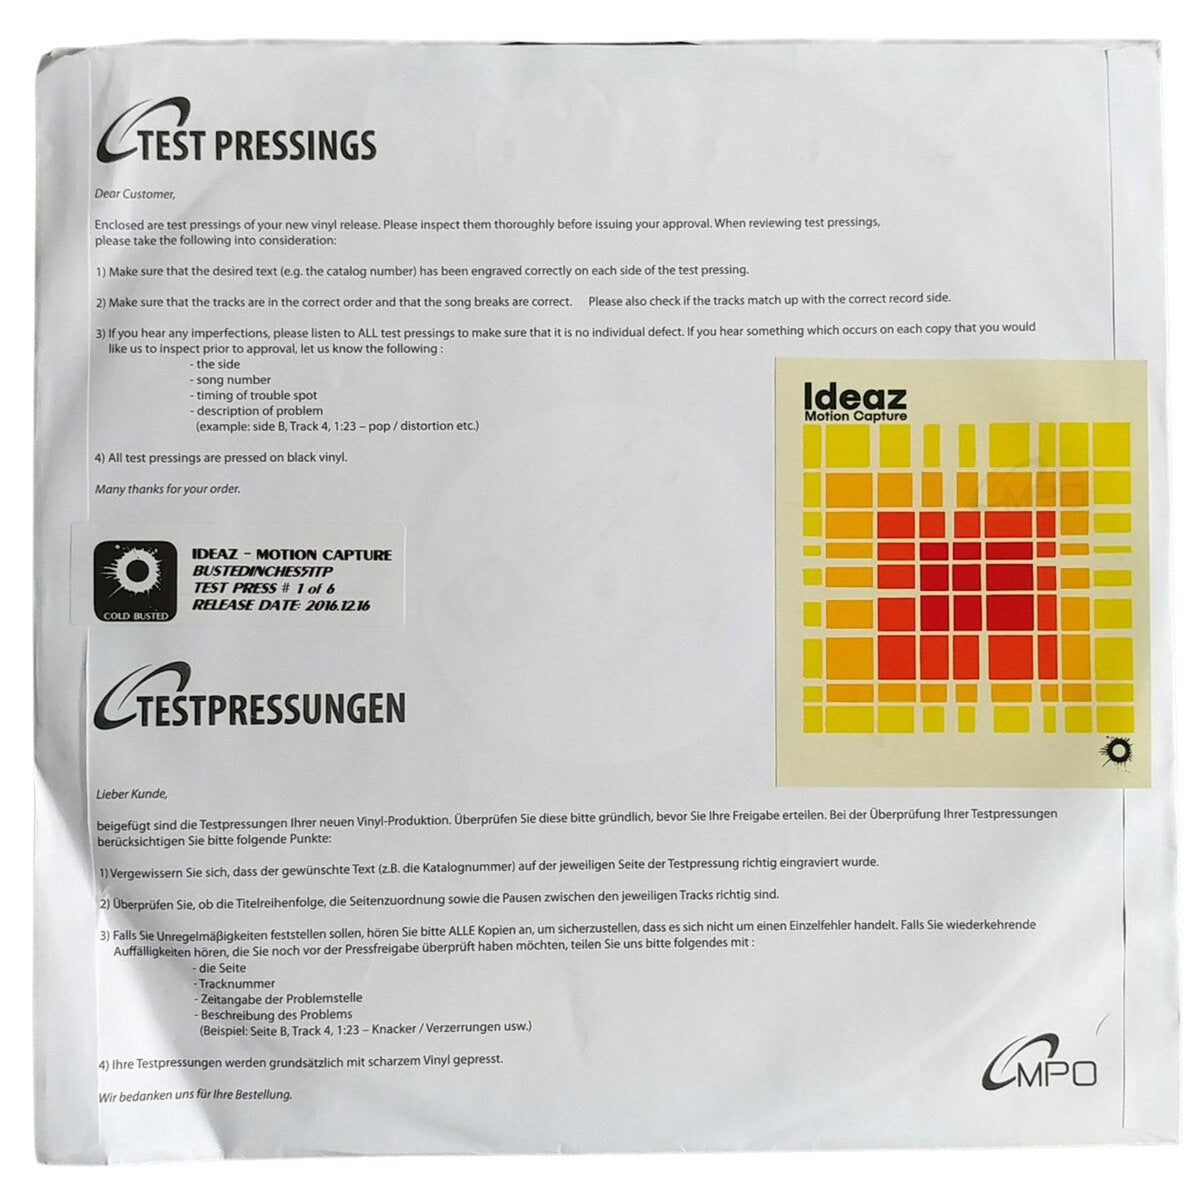 Ideaz - Motion Capture - Limited Edition 12 Inch Vinyl Test Pressing - Cold Busted